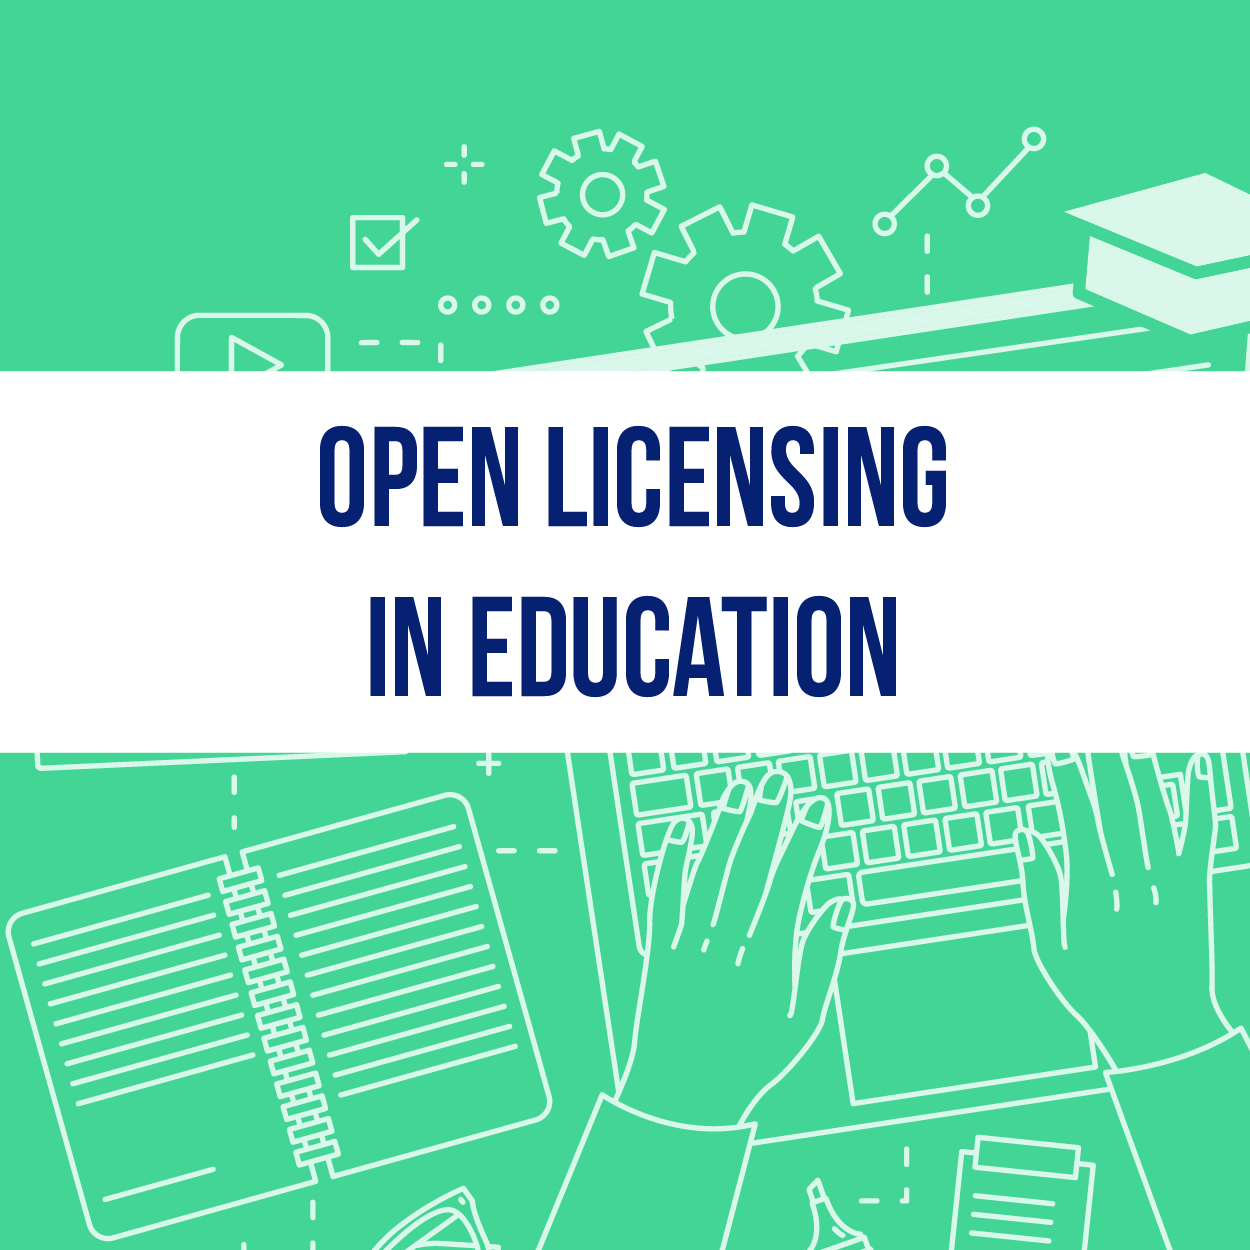 Open Licensing in Education - Infographic